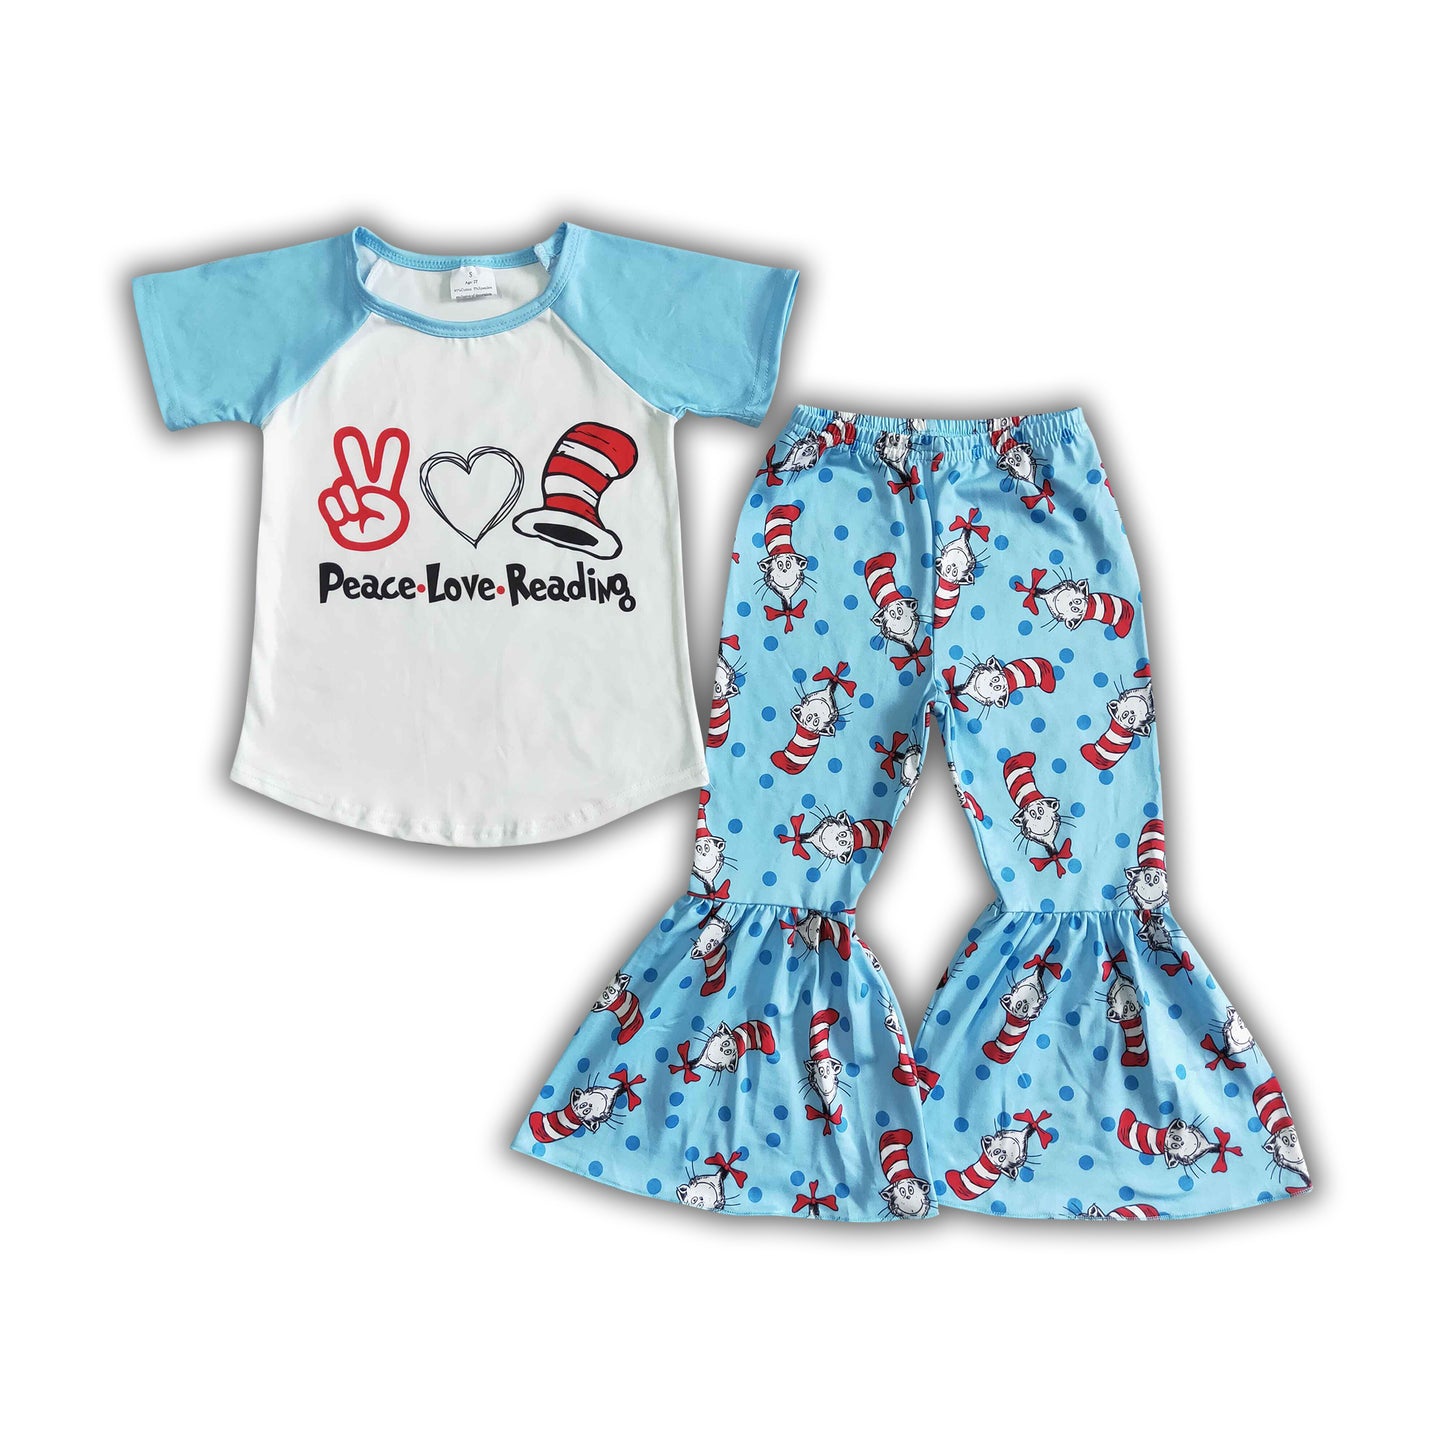 Blue Cat Short Sleeve Top & Blue Bell-bottomed Pants Outfit